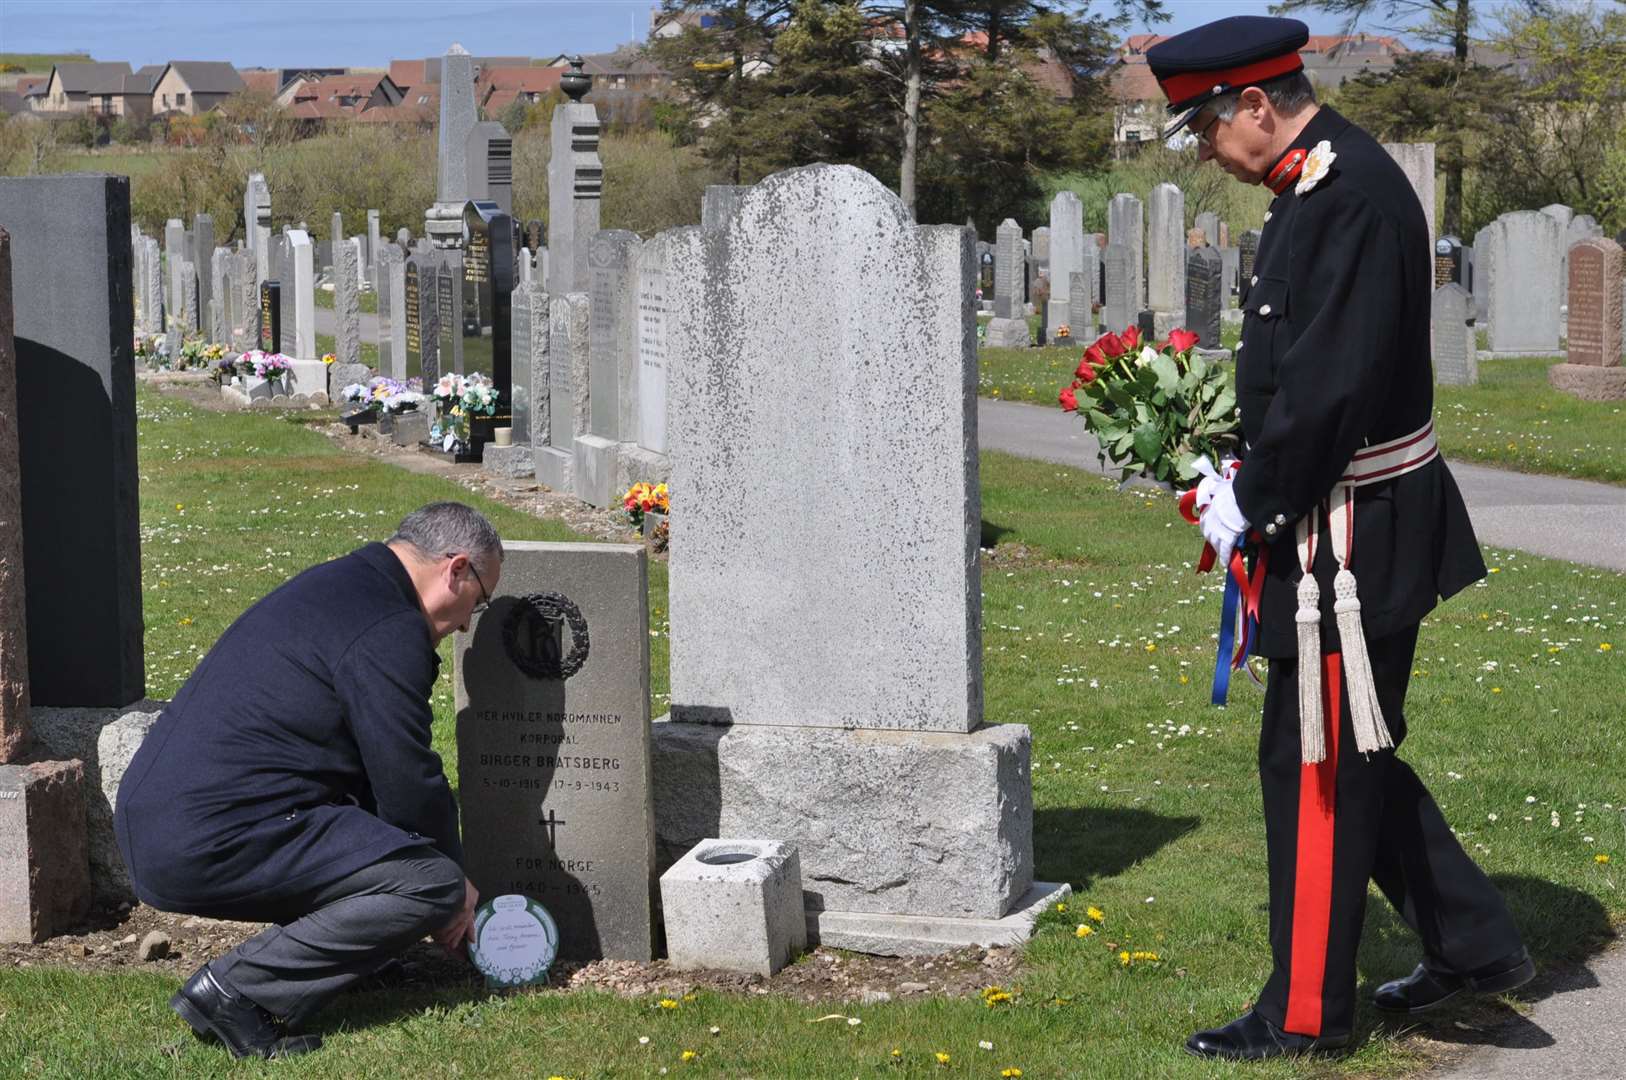 Commonwealth War Graves Commission volunteer Vincent Stuart at the graveside of Birger Bratsberg as Andrew Simpson, Lord Lieutant of Banffshire, watches on.